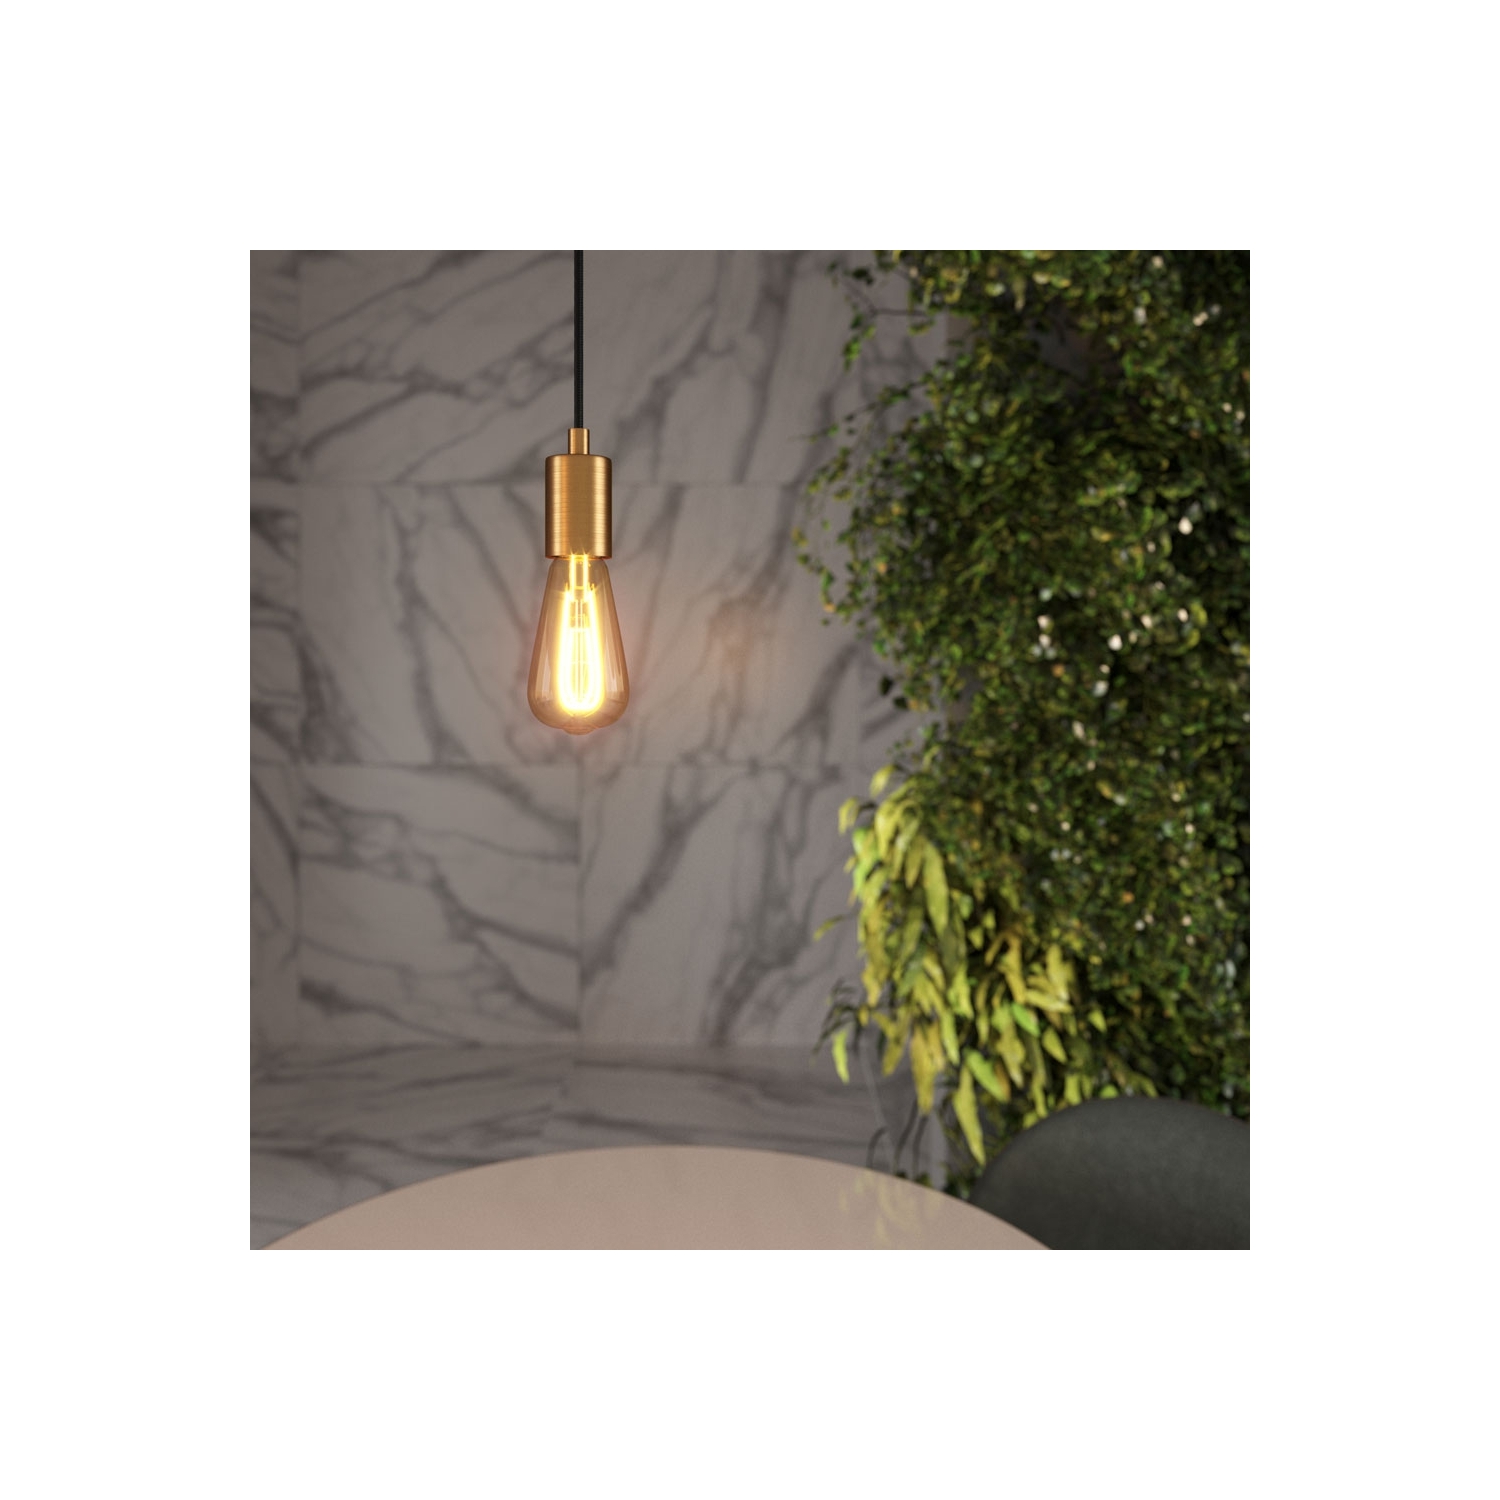 Pendant lamp with textile cable and satin metal details